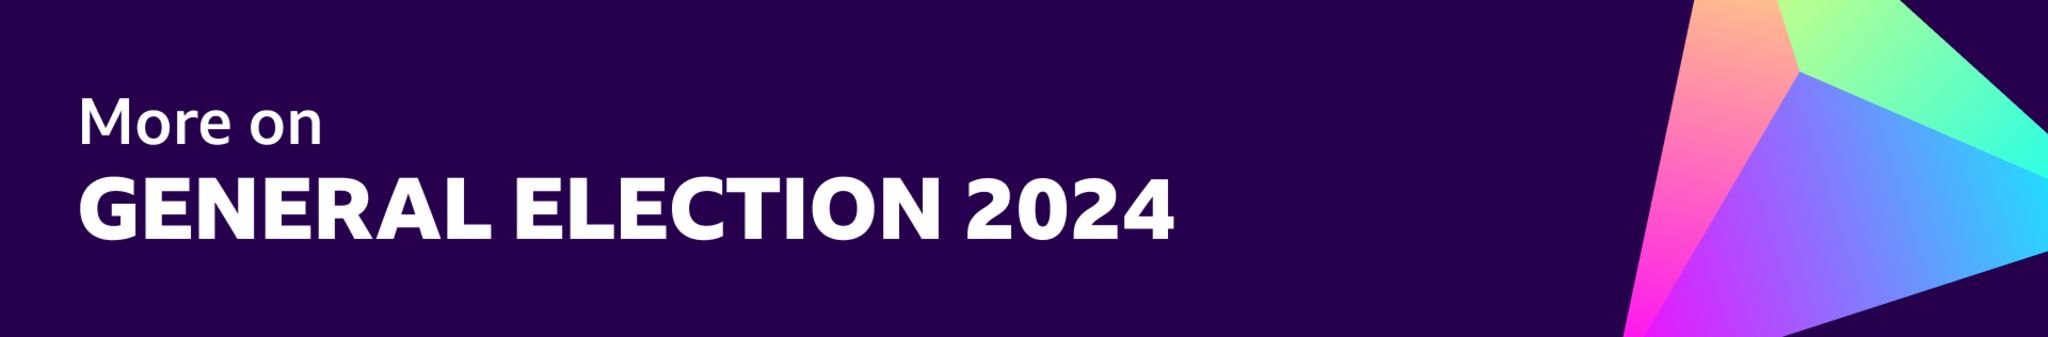 Election branding saying More on General Election 2024, against a purple background and icon showing party colours